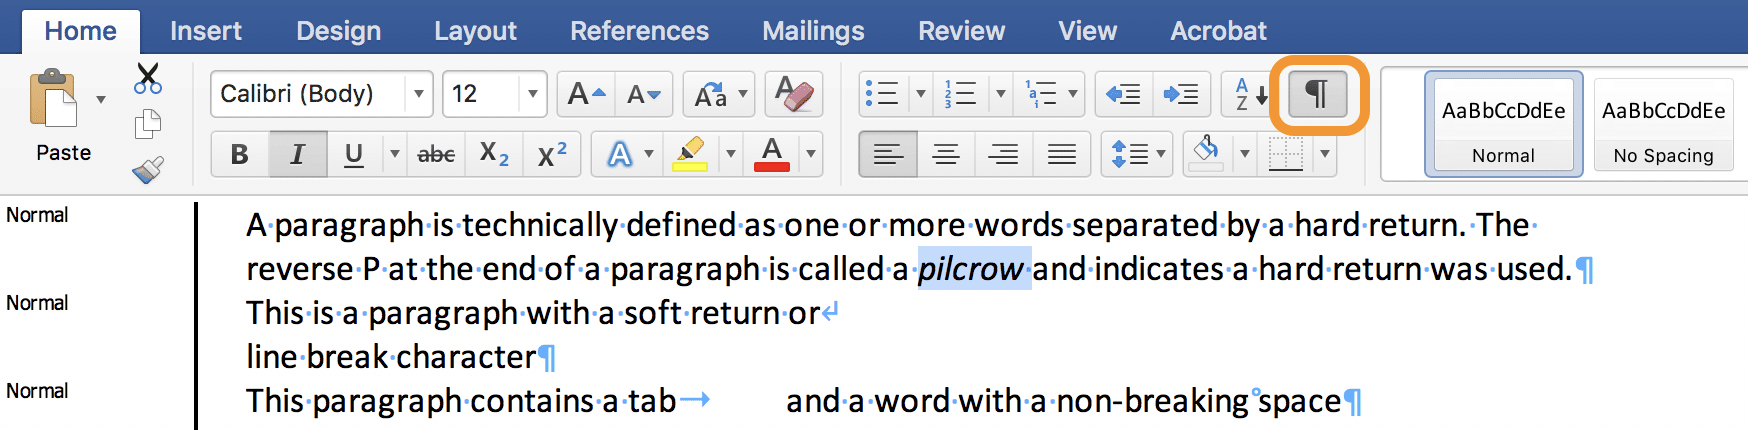 Screenshot showing the location of the Show/Hide button on the Microsoft Word ribbon.